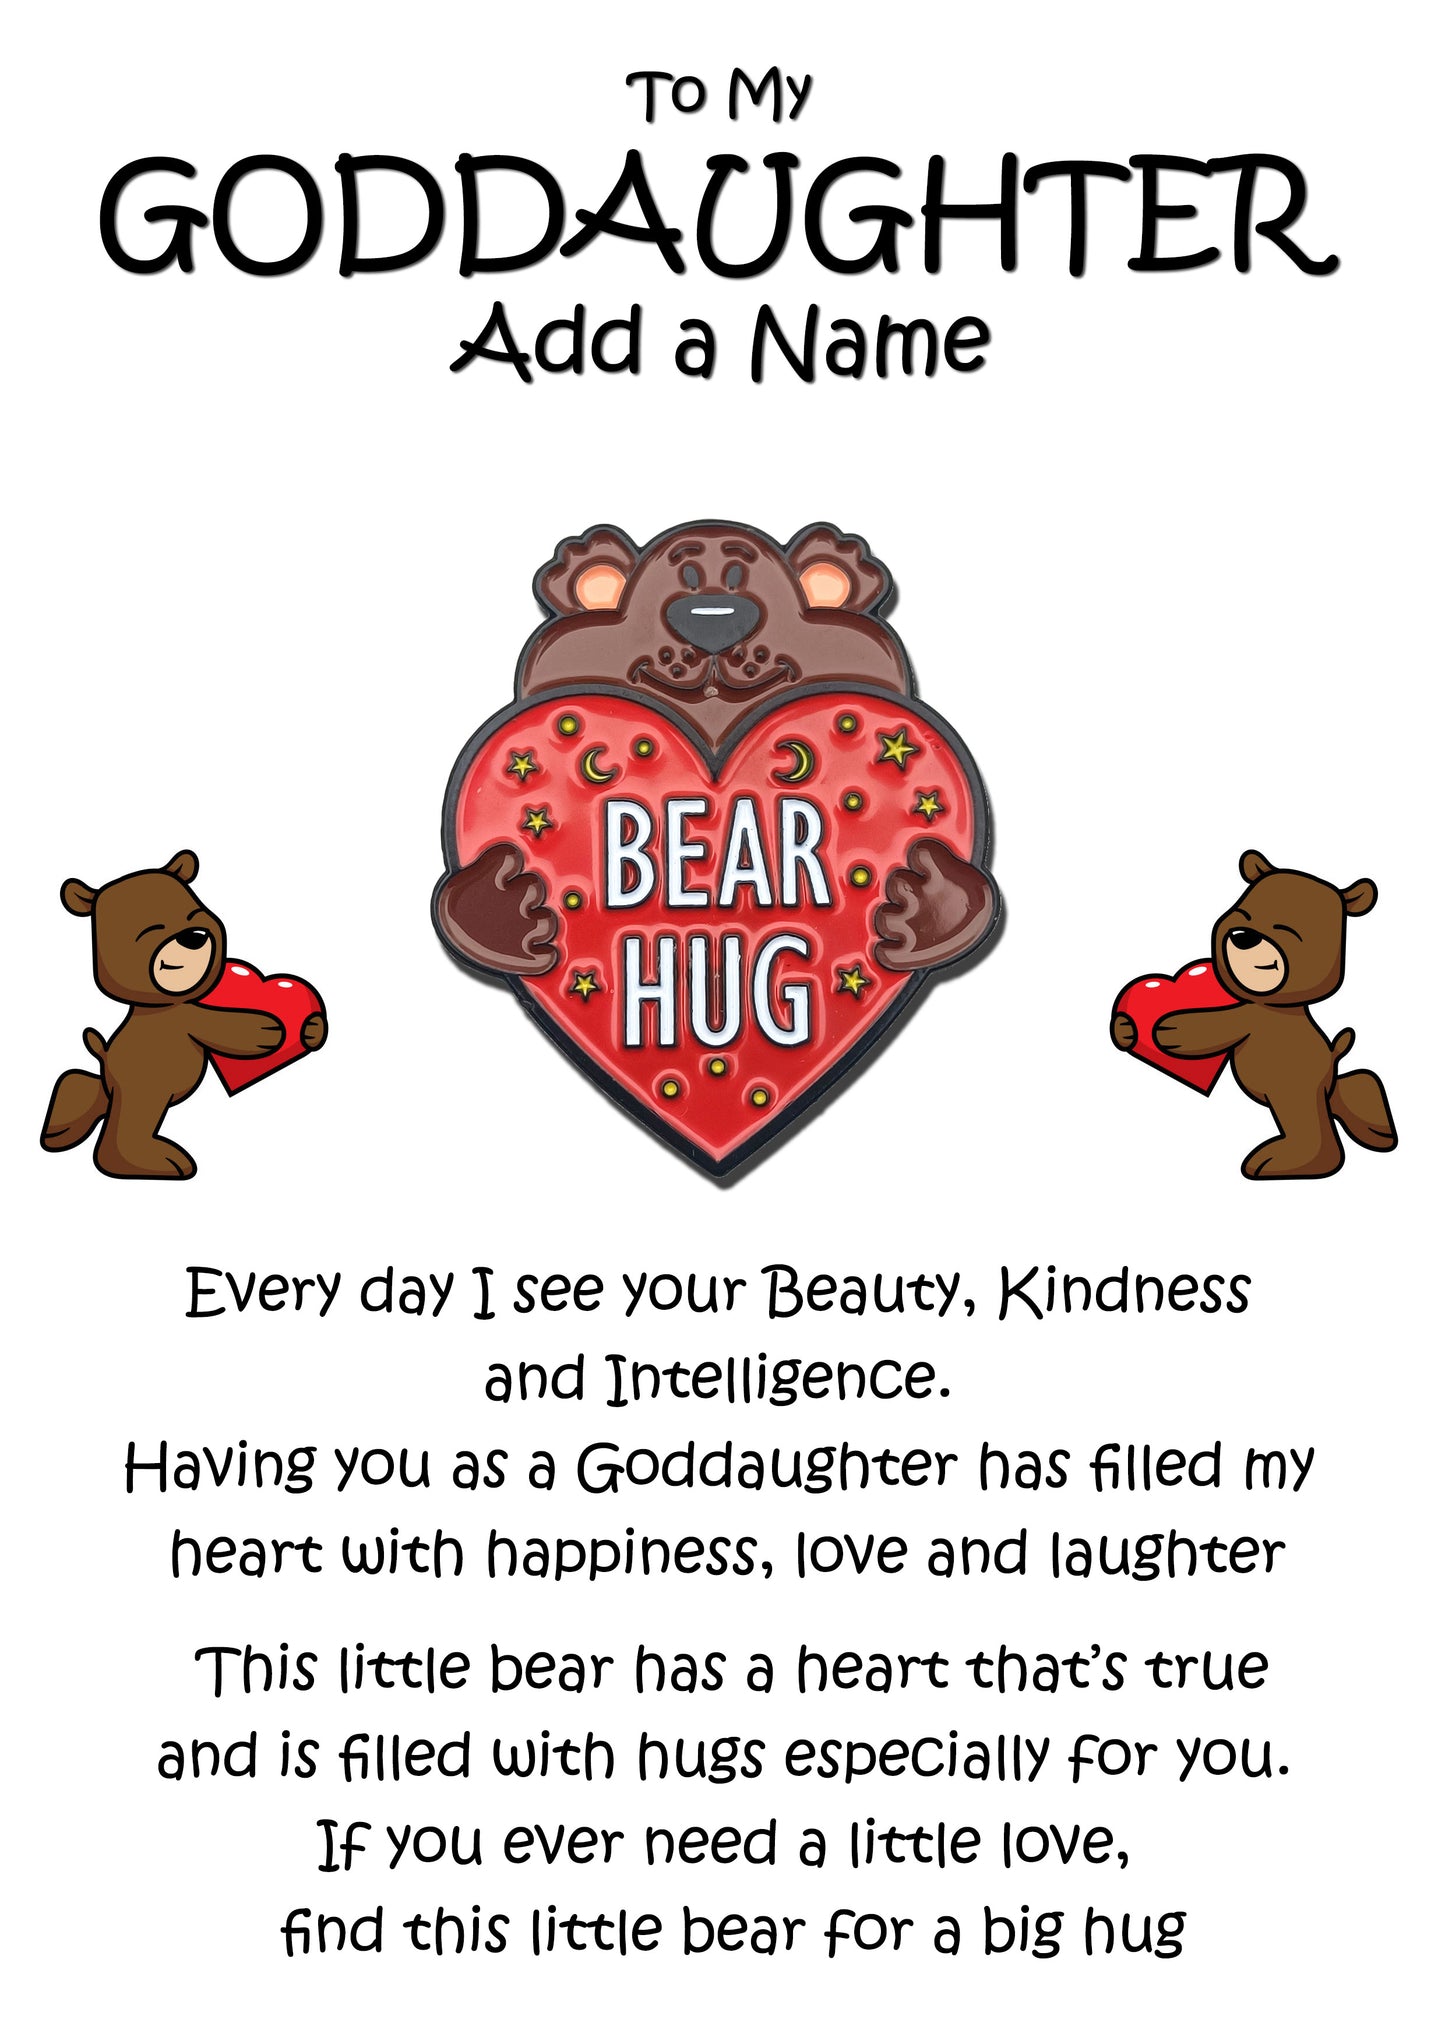 Bear Hug Red Heart Pin Badges & Personalised Goddaughter Message Cards